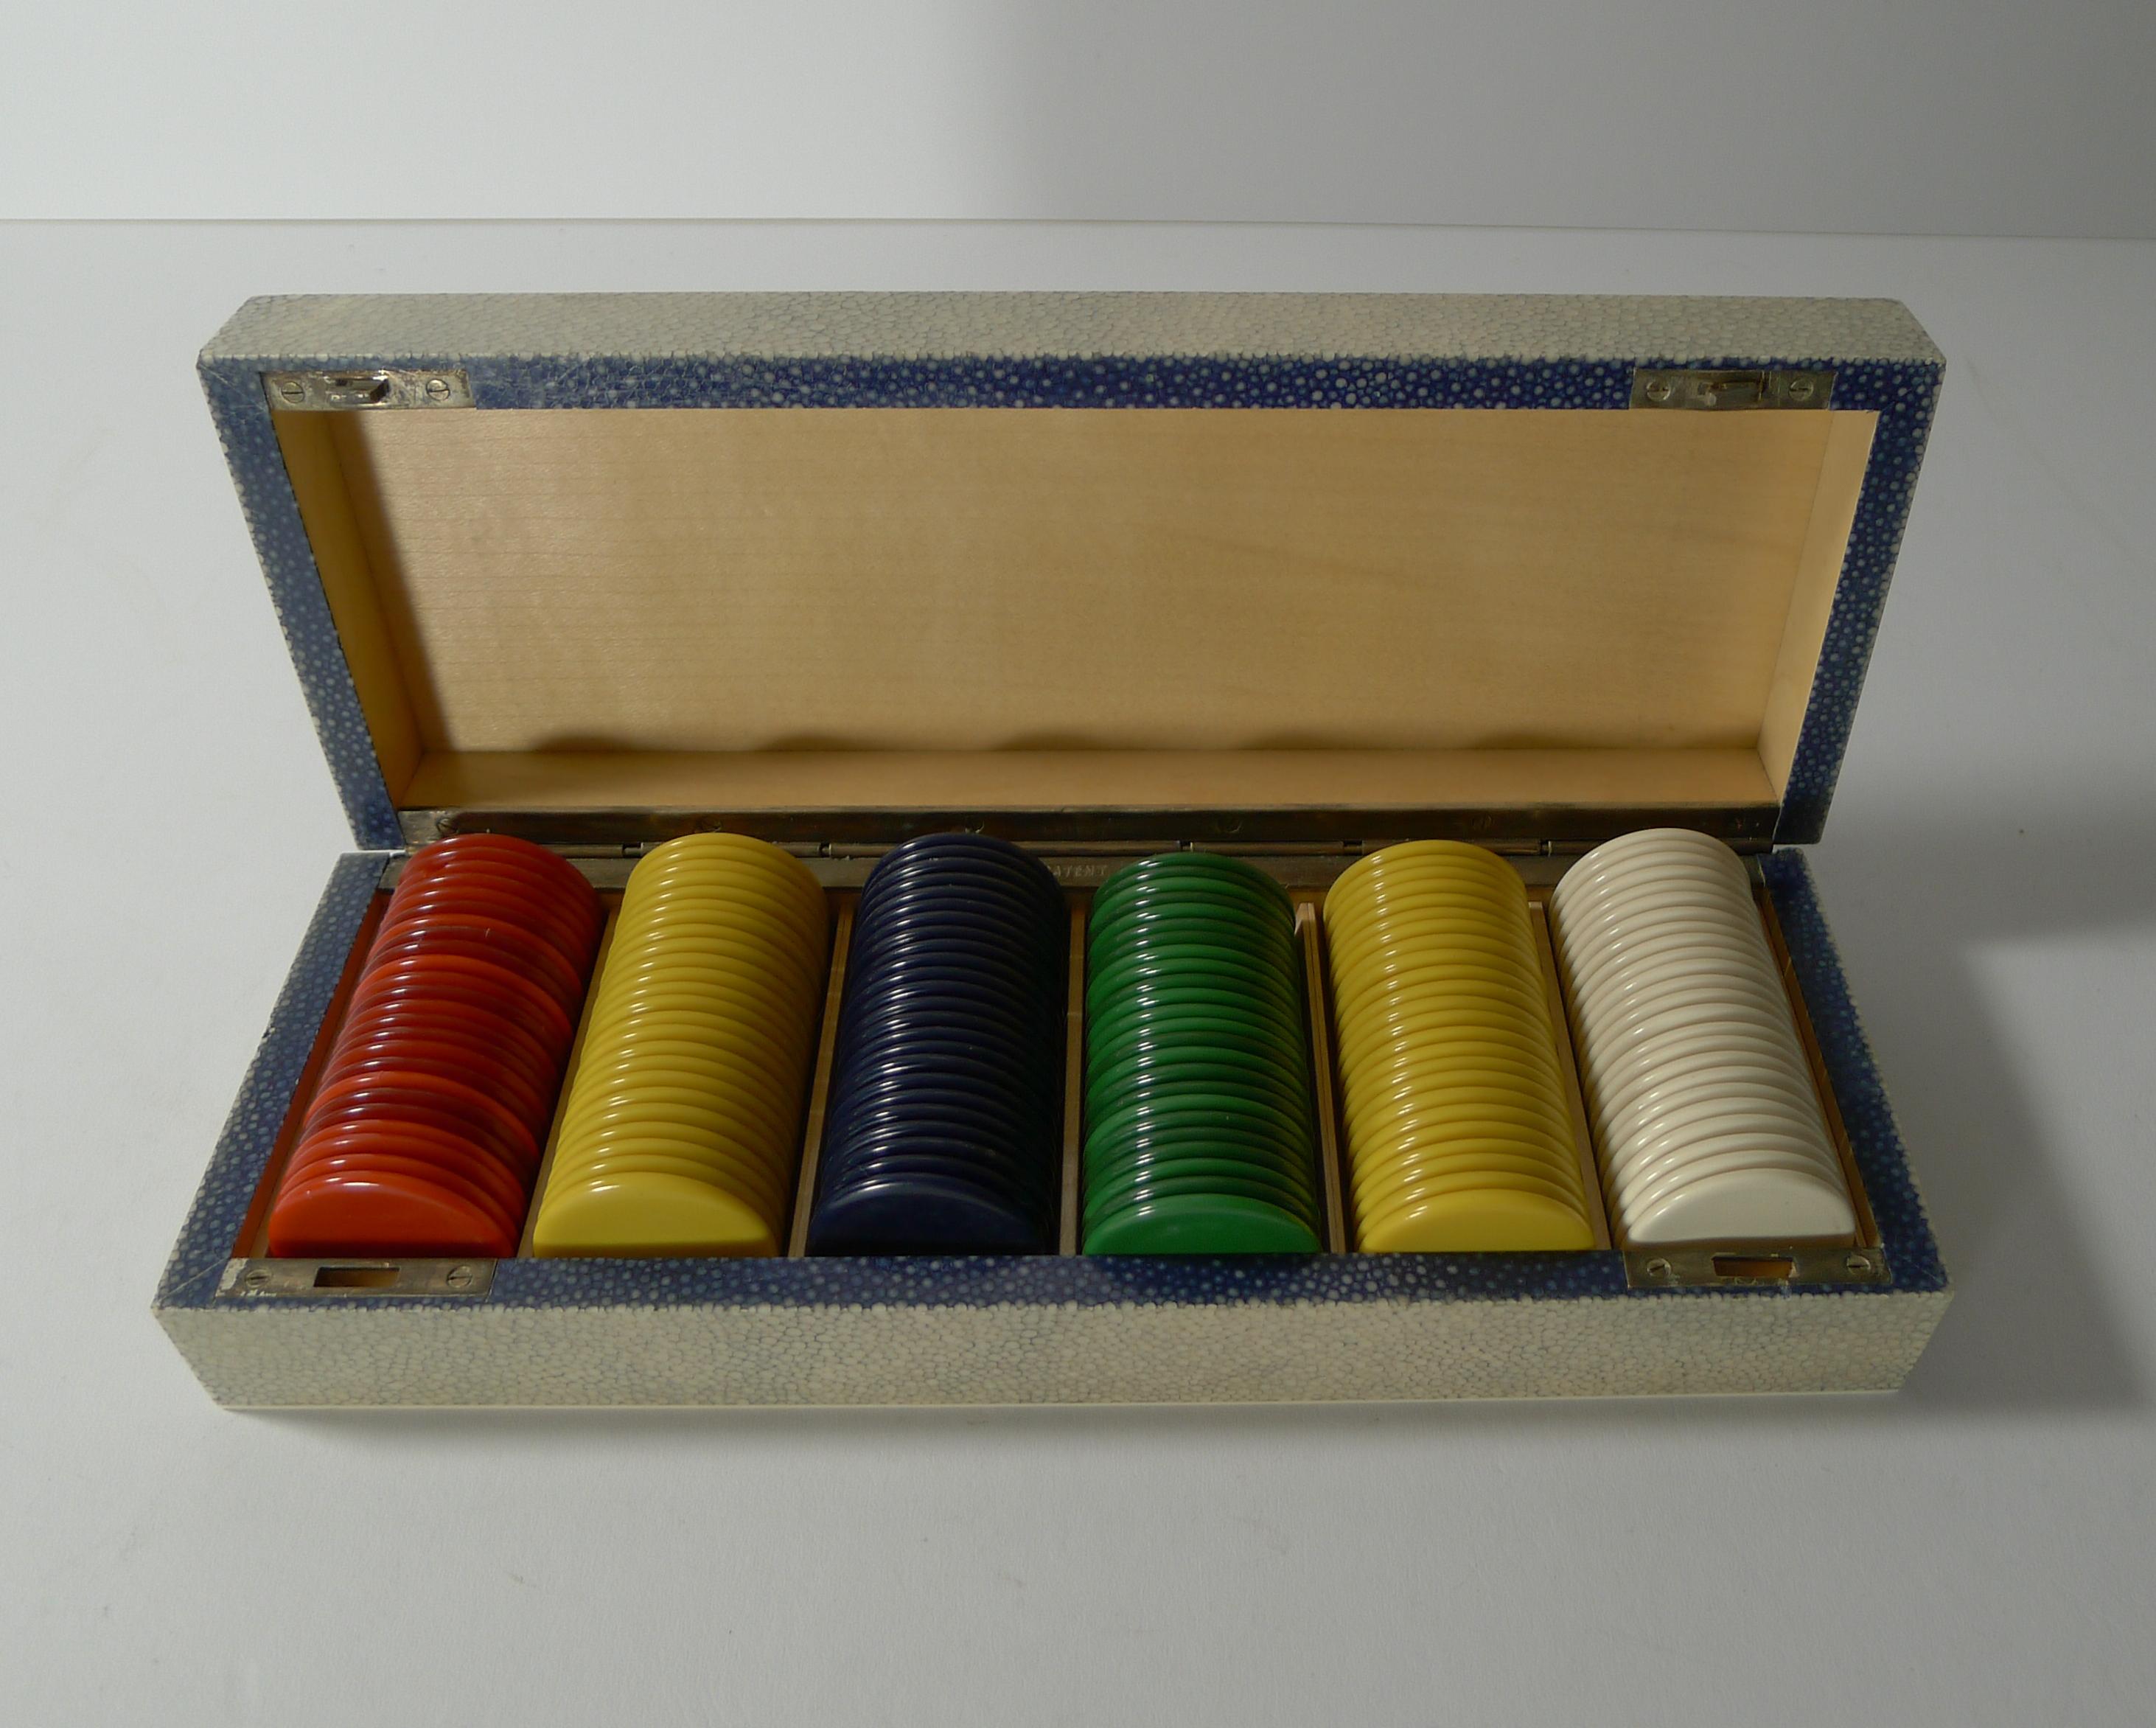 Art Deco Smart Antique Shagreen Gaming Counter / Poker Chip Box, c.1920 For Sale